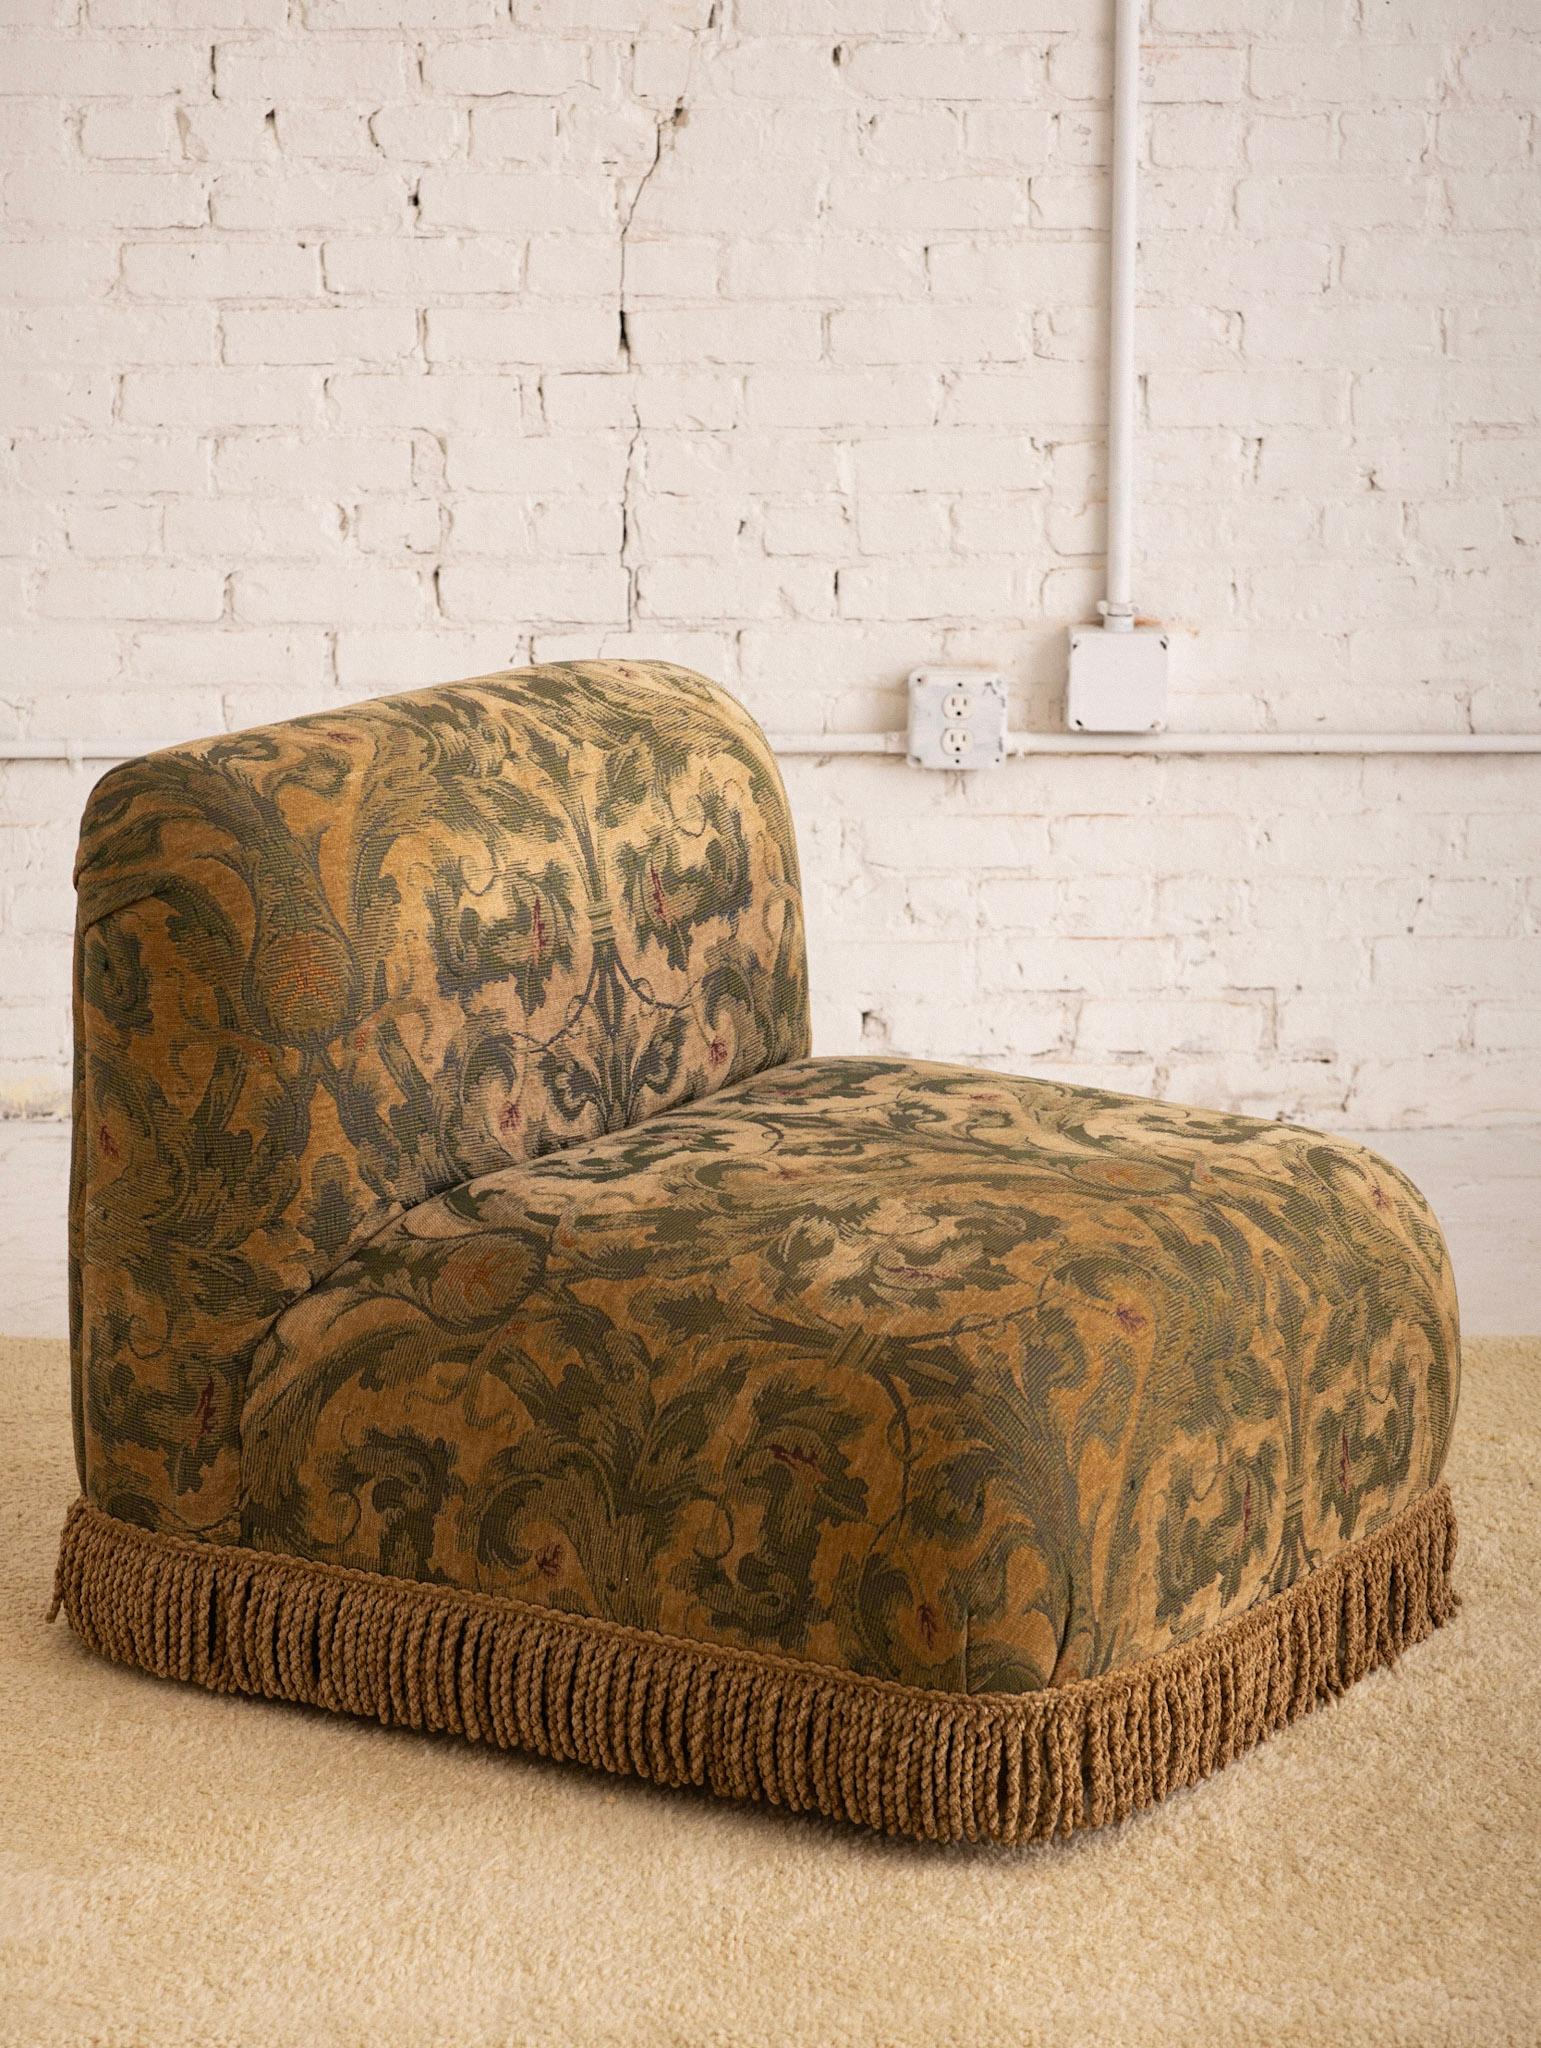 Post Modern slipper chair in a tapestry print fabric with fringe trim. Simple low profile silhouette. Can be reupholstered at your discretion. 2 available.